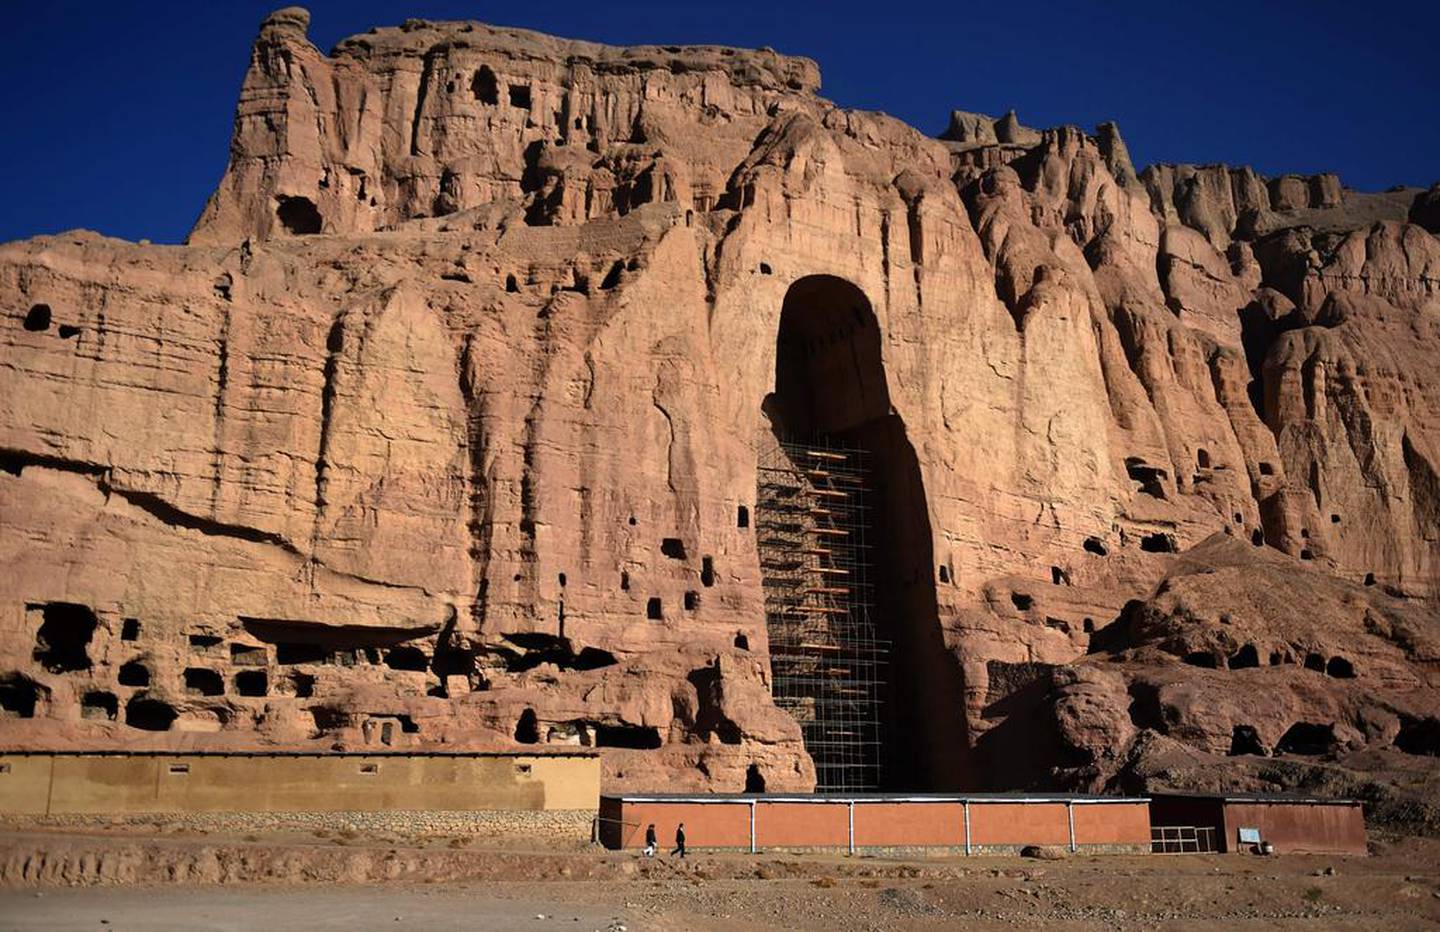 The site of the giant Buddha statues that were destroyed by the Taliban in 2001 in Afghanistan's Bamiyan province. AFP